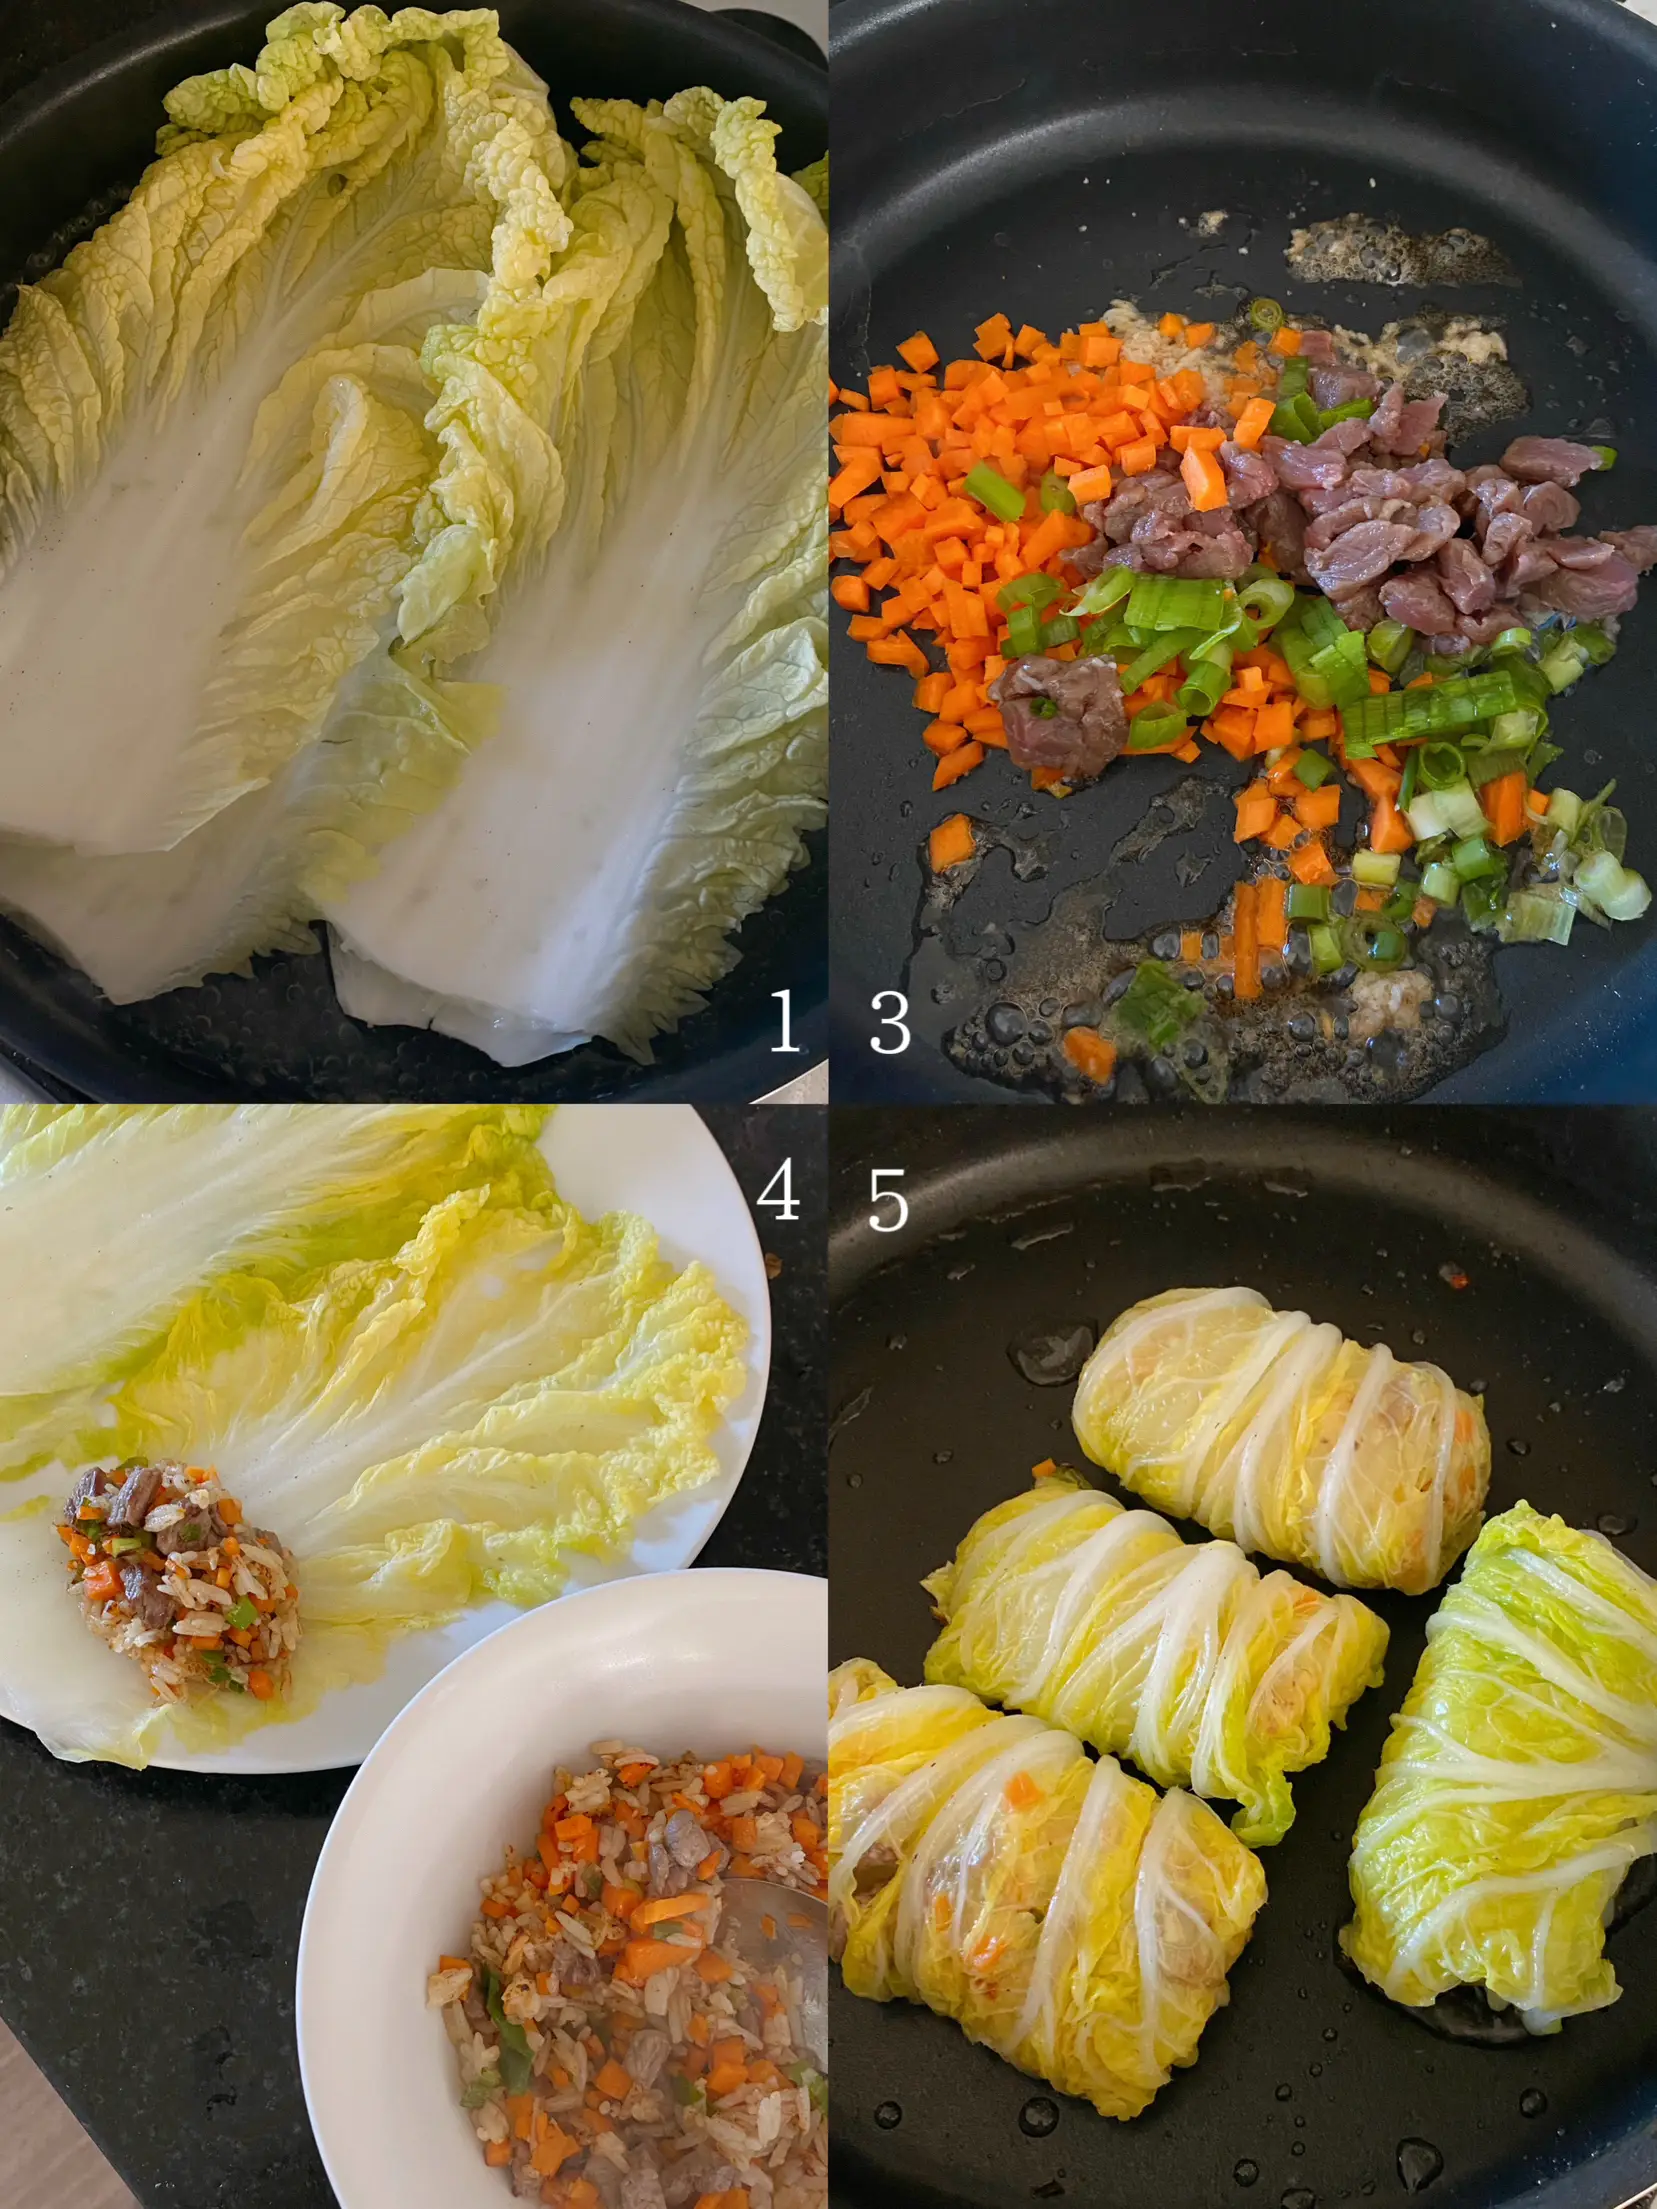 Healthy meal idea: CABBAGE ROLLS 🥬's images(2)